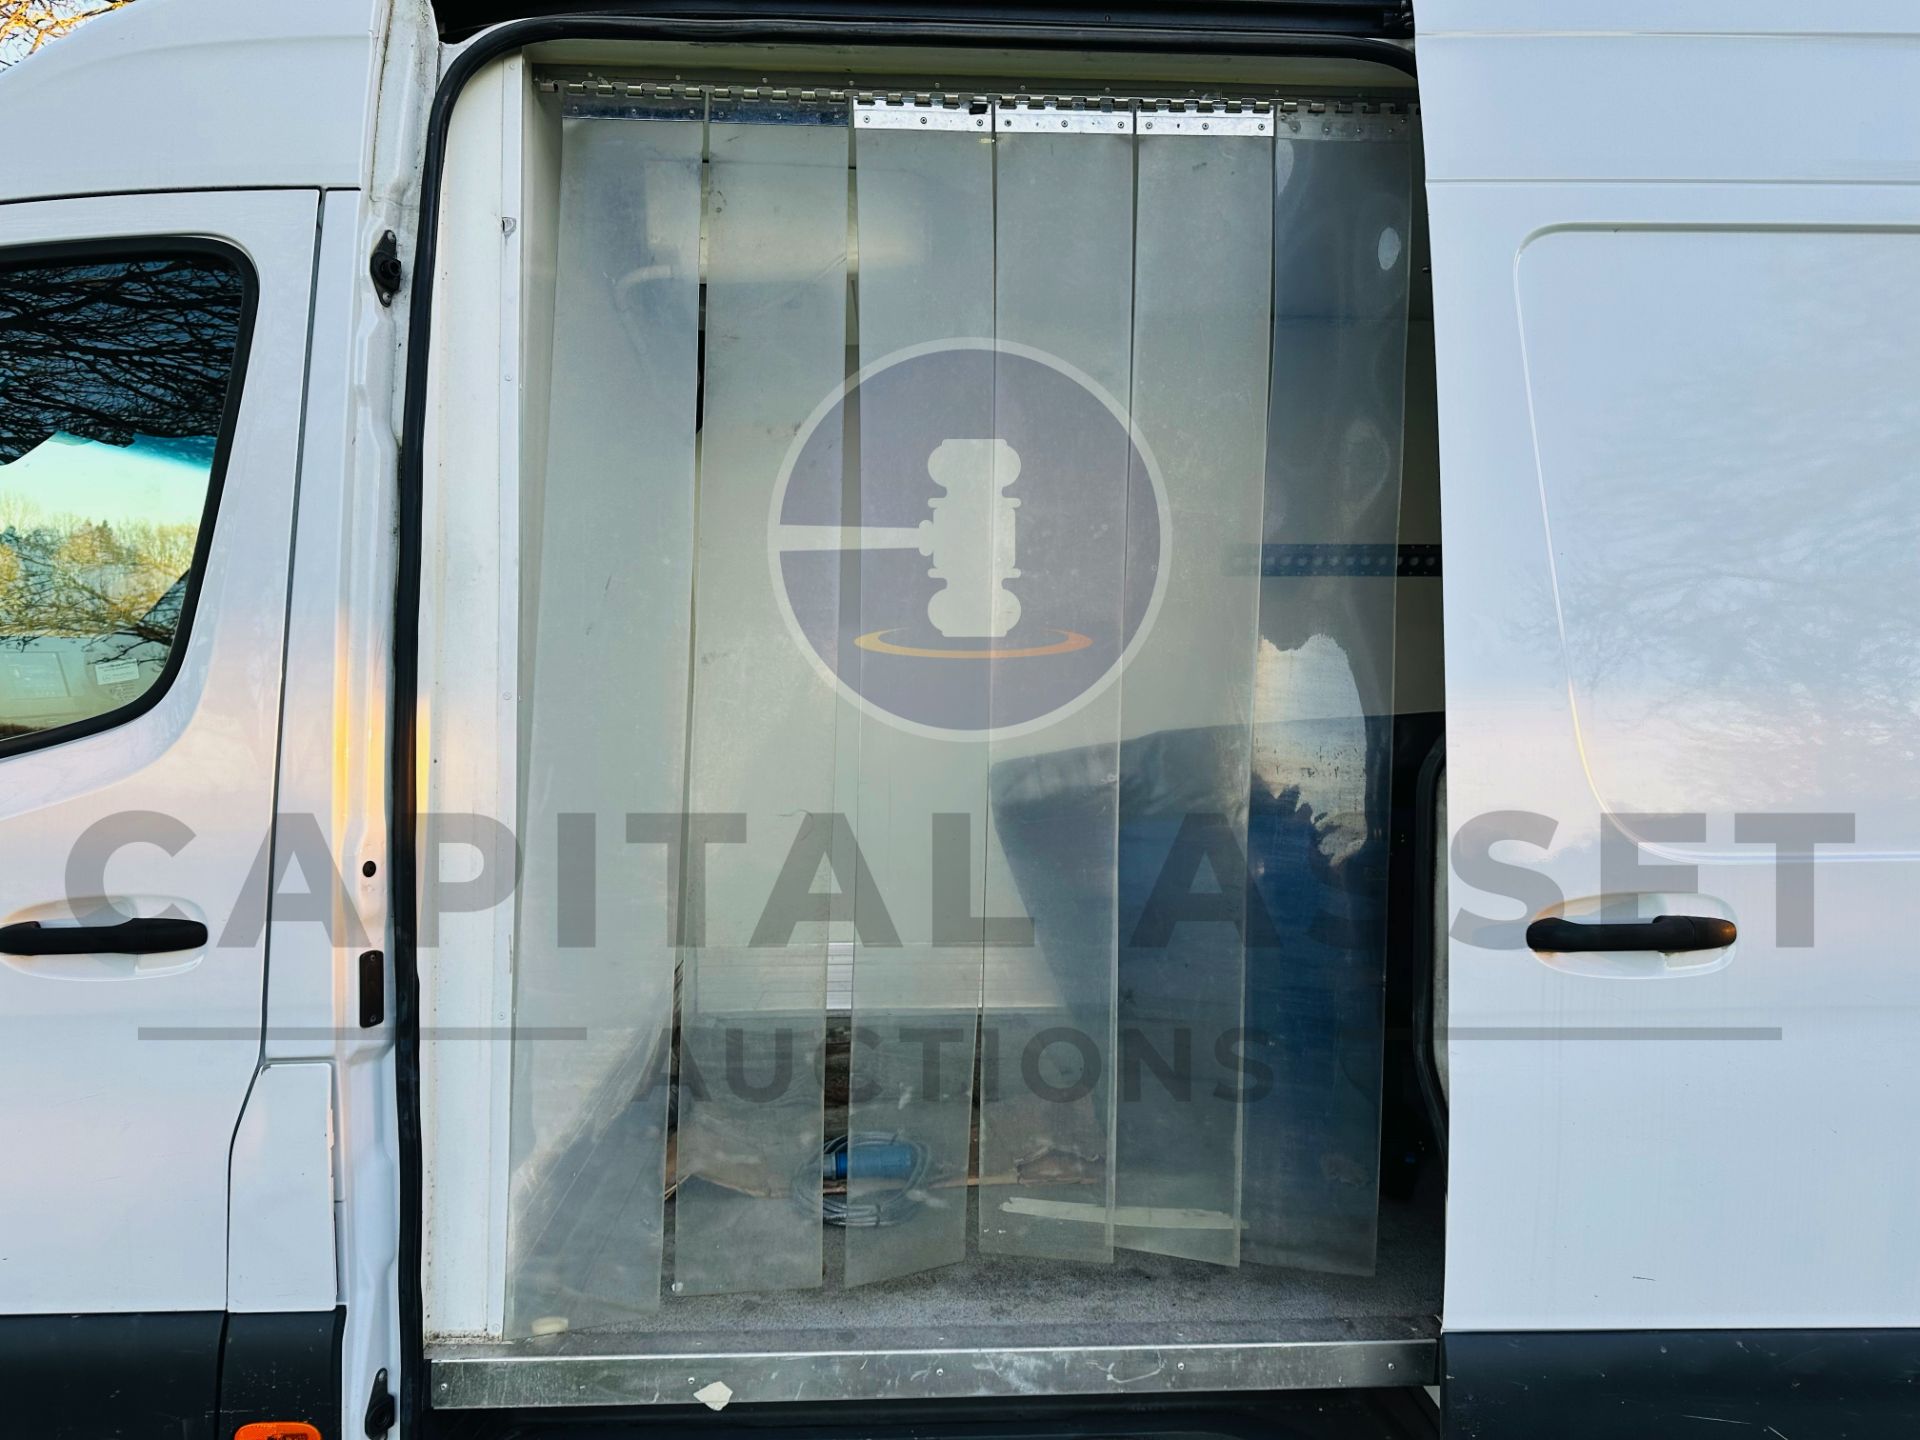 MERCEDES-BENZ SPRINTER 314 CDI *MWB - REFRIGERATED VAN* (2019 - FACELIFT MODEL) *OVERNIGHT STANDBY* - Image 14 of 32